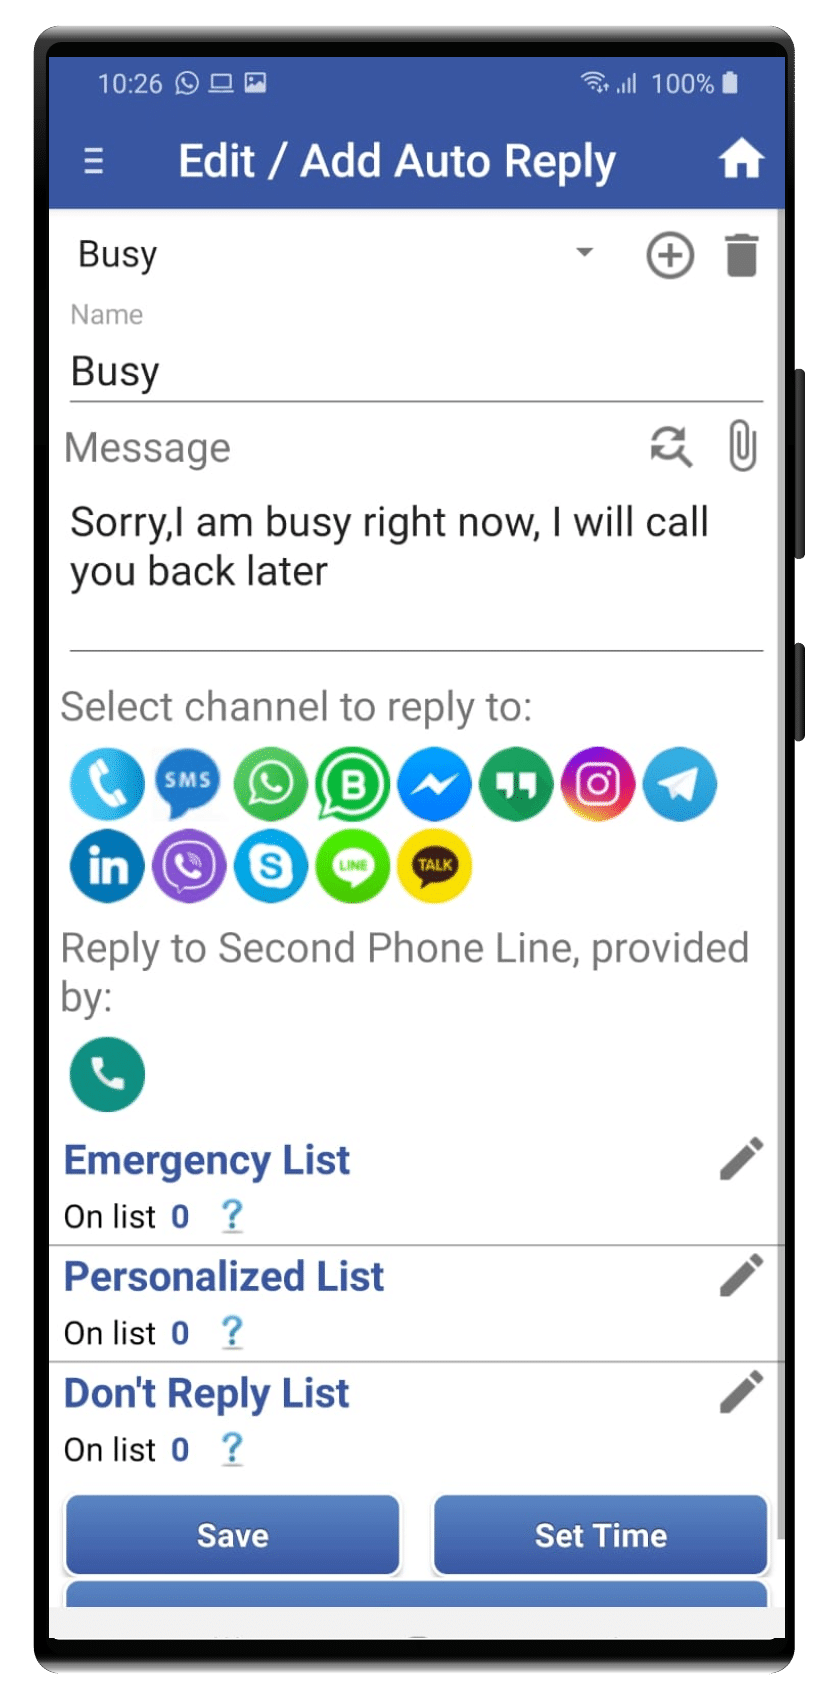 SMS Auto Reply for Missed Calls App